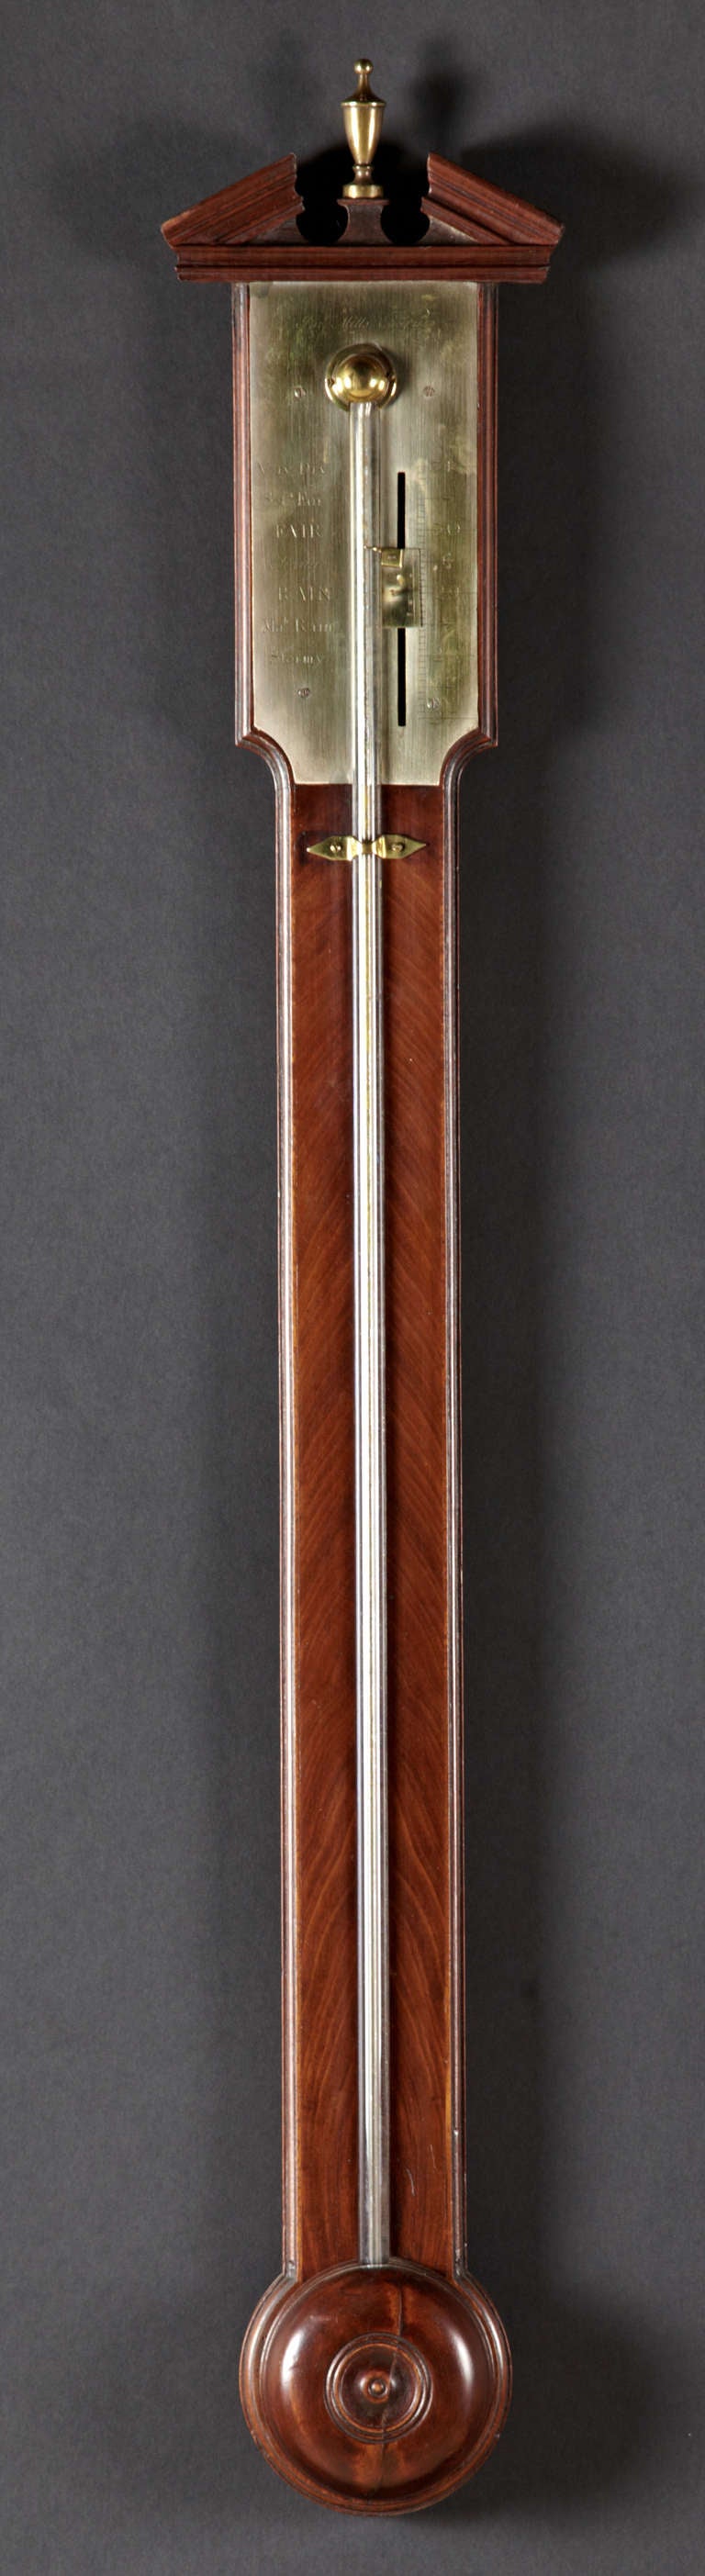 A mahogany stick barometer with pitched pediment and open face with disc turned cistern cover. Early 19th century.